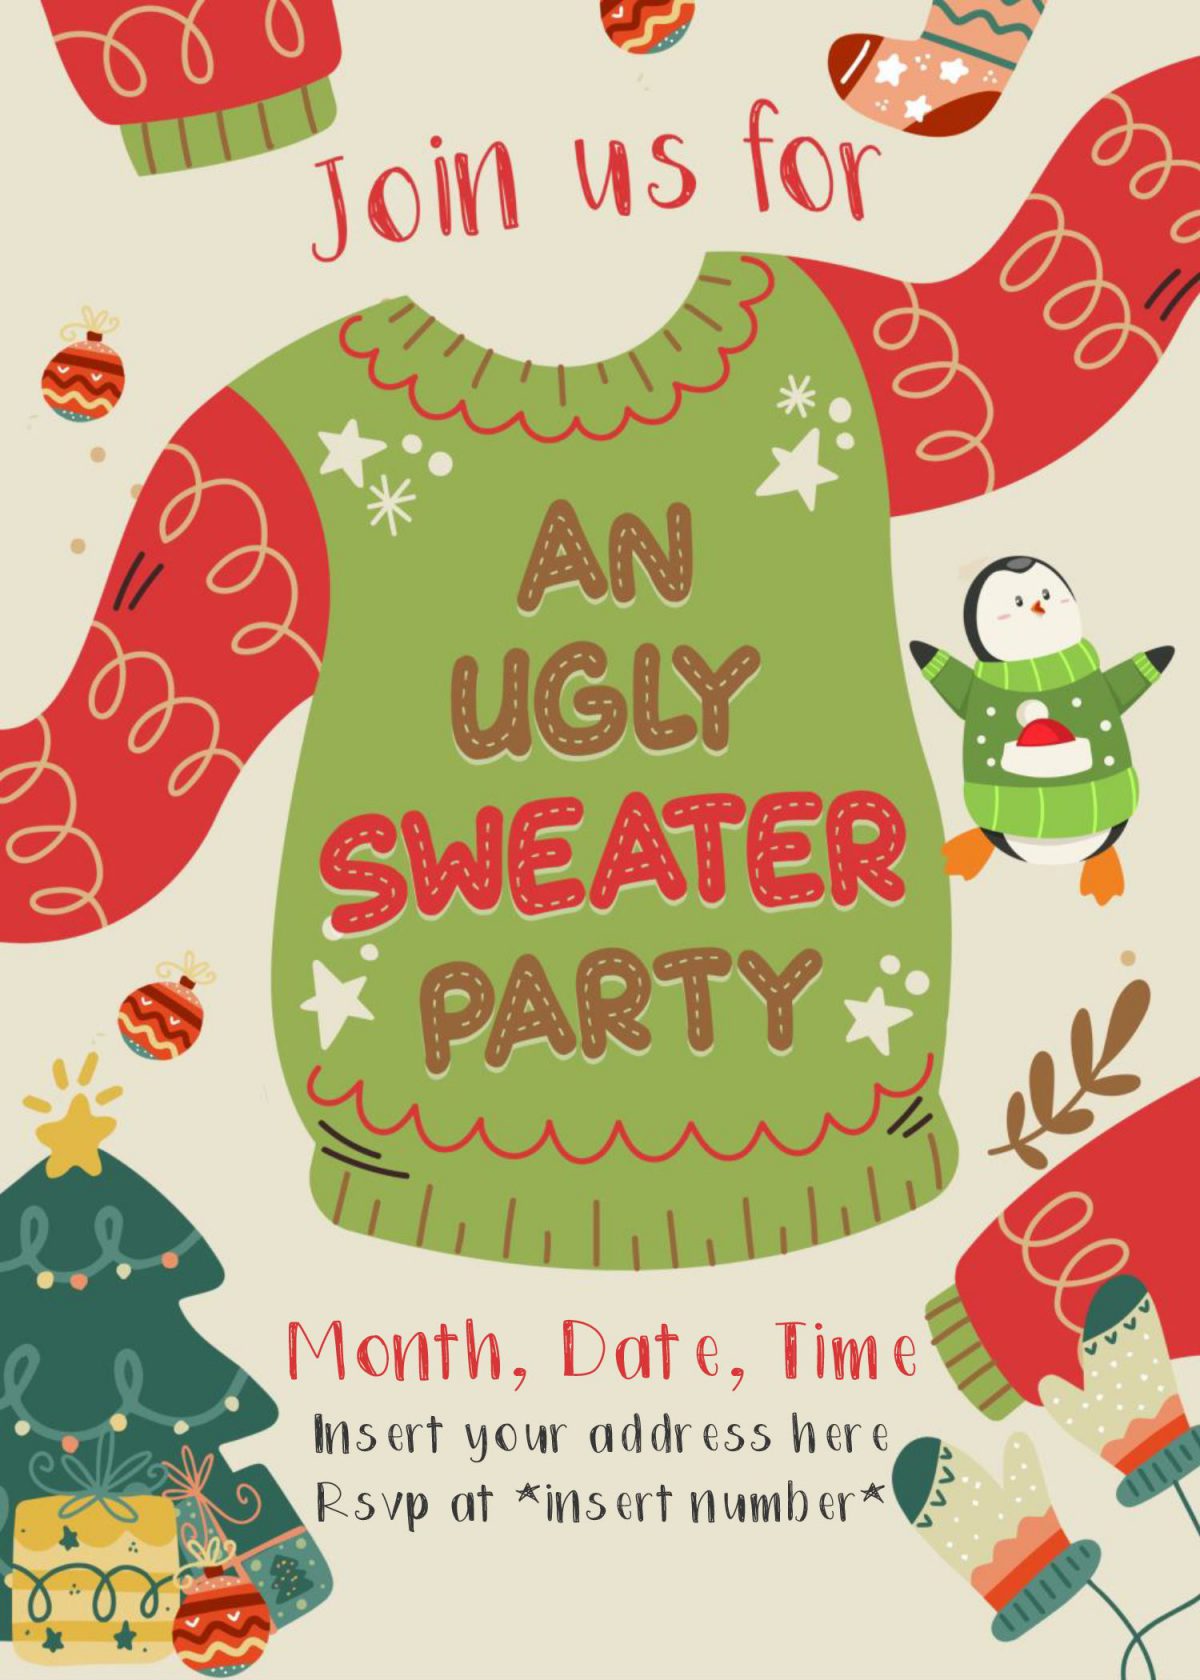 Free Winter Ugly Sweater Birthday Party Invitation Templates For Word and has Christmas tree and balls